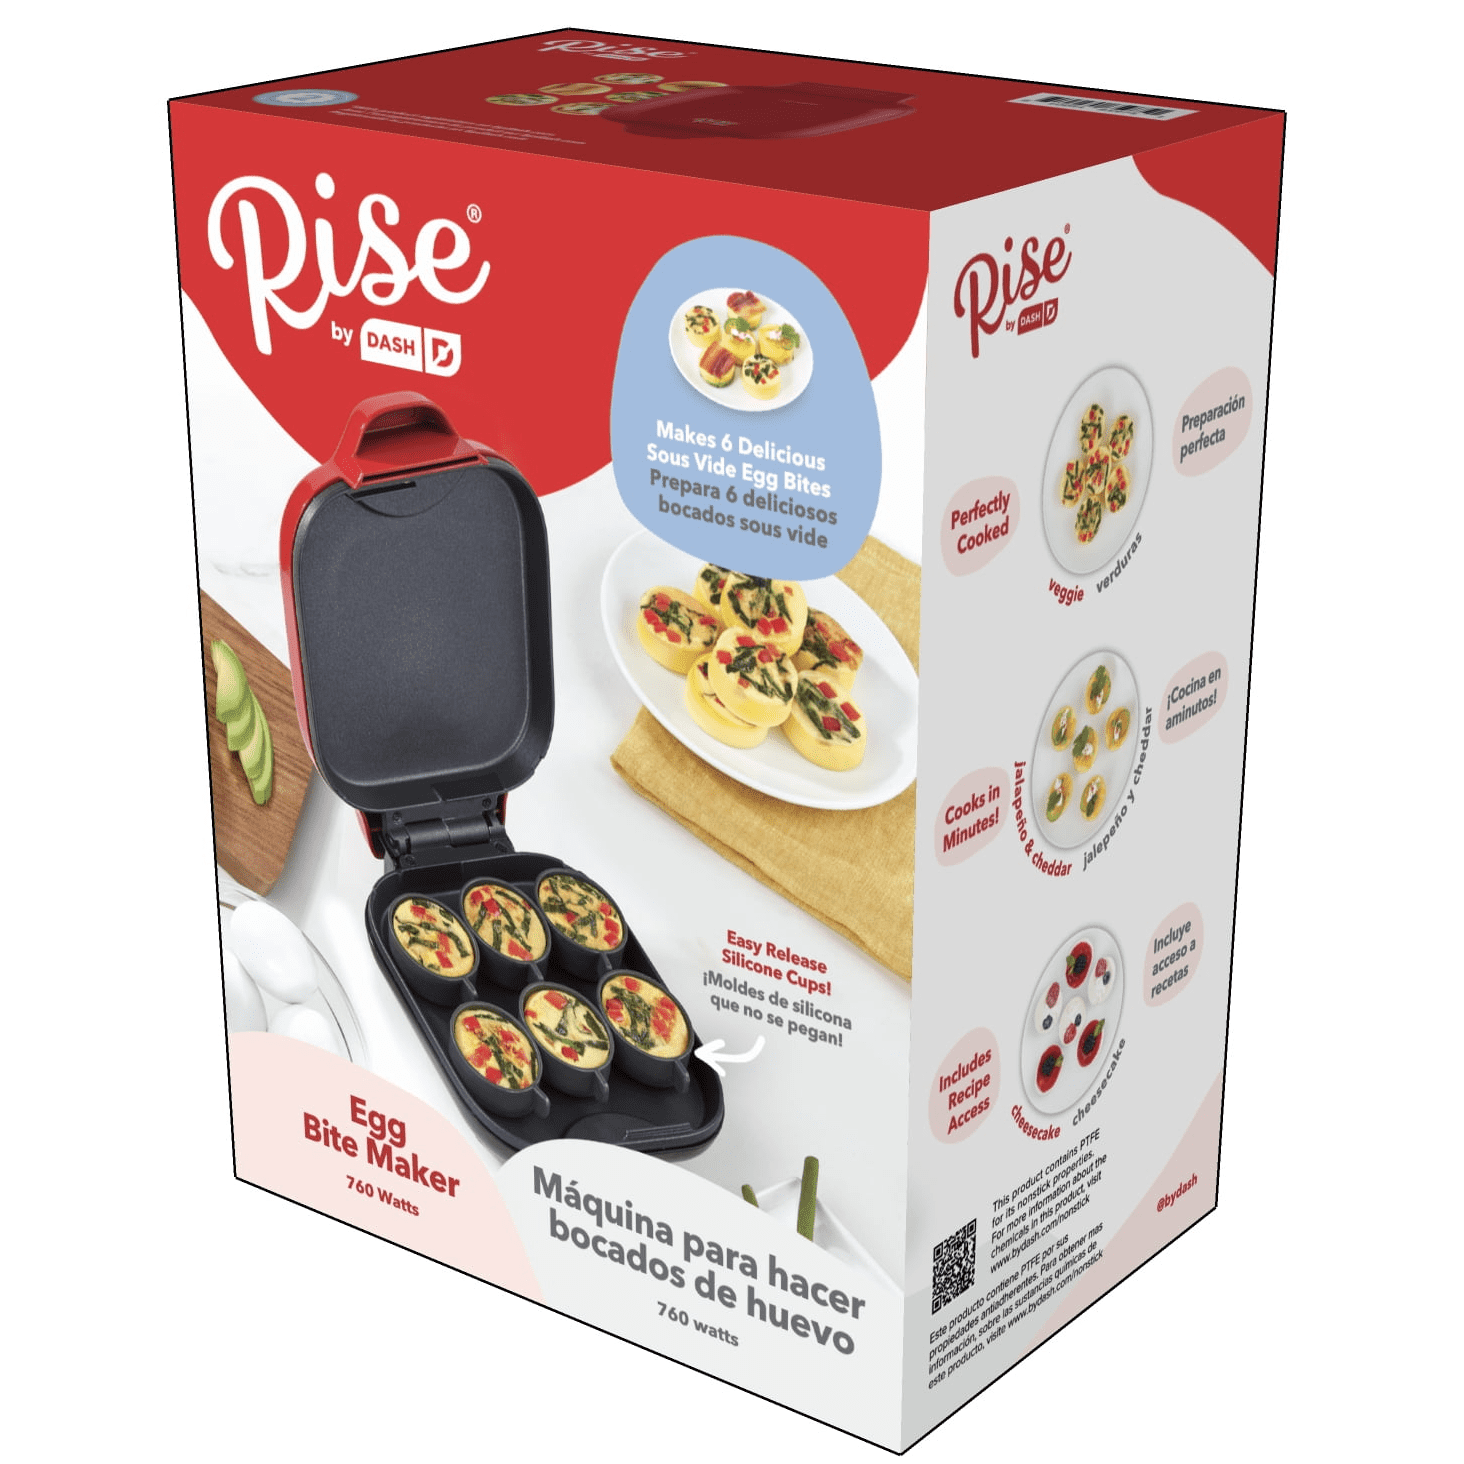 Rise by Dash Egg Bite Maker with 6 Silicone Molds + Recipe Guide - Red 